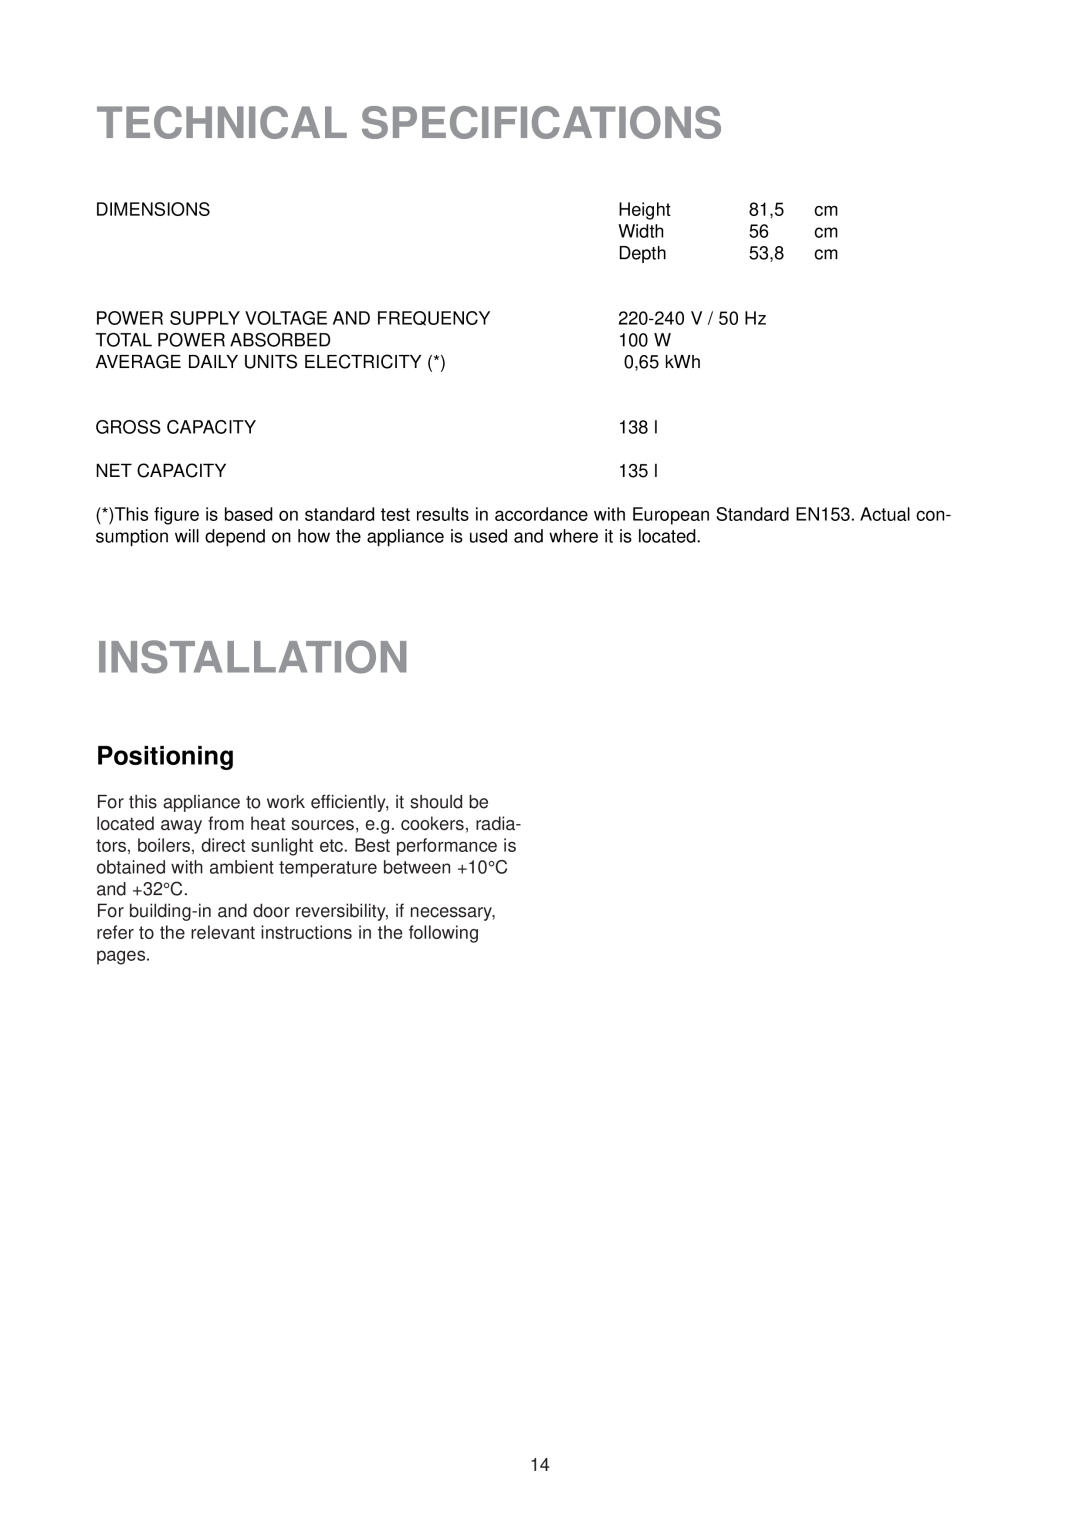 Zanussi ZU 7155 manual Technical Specifications, Installation, Positioning 